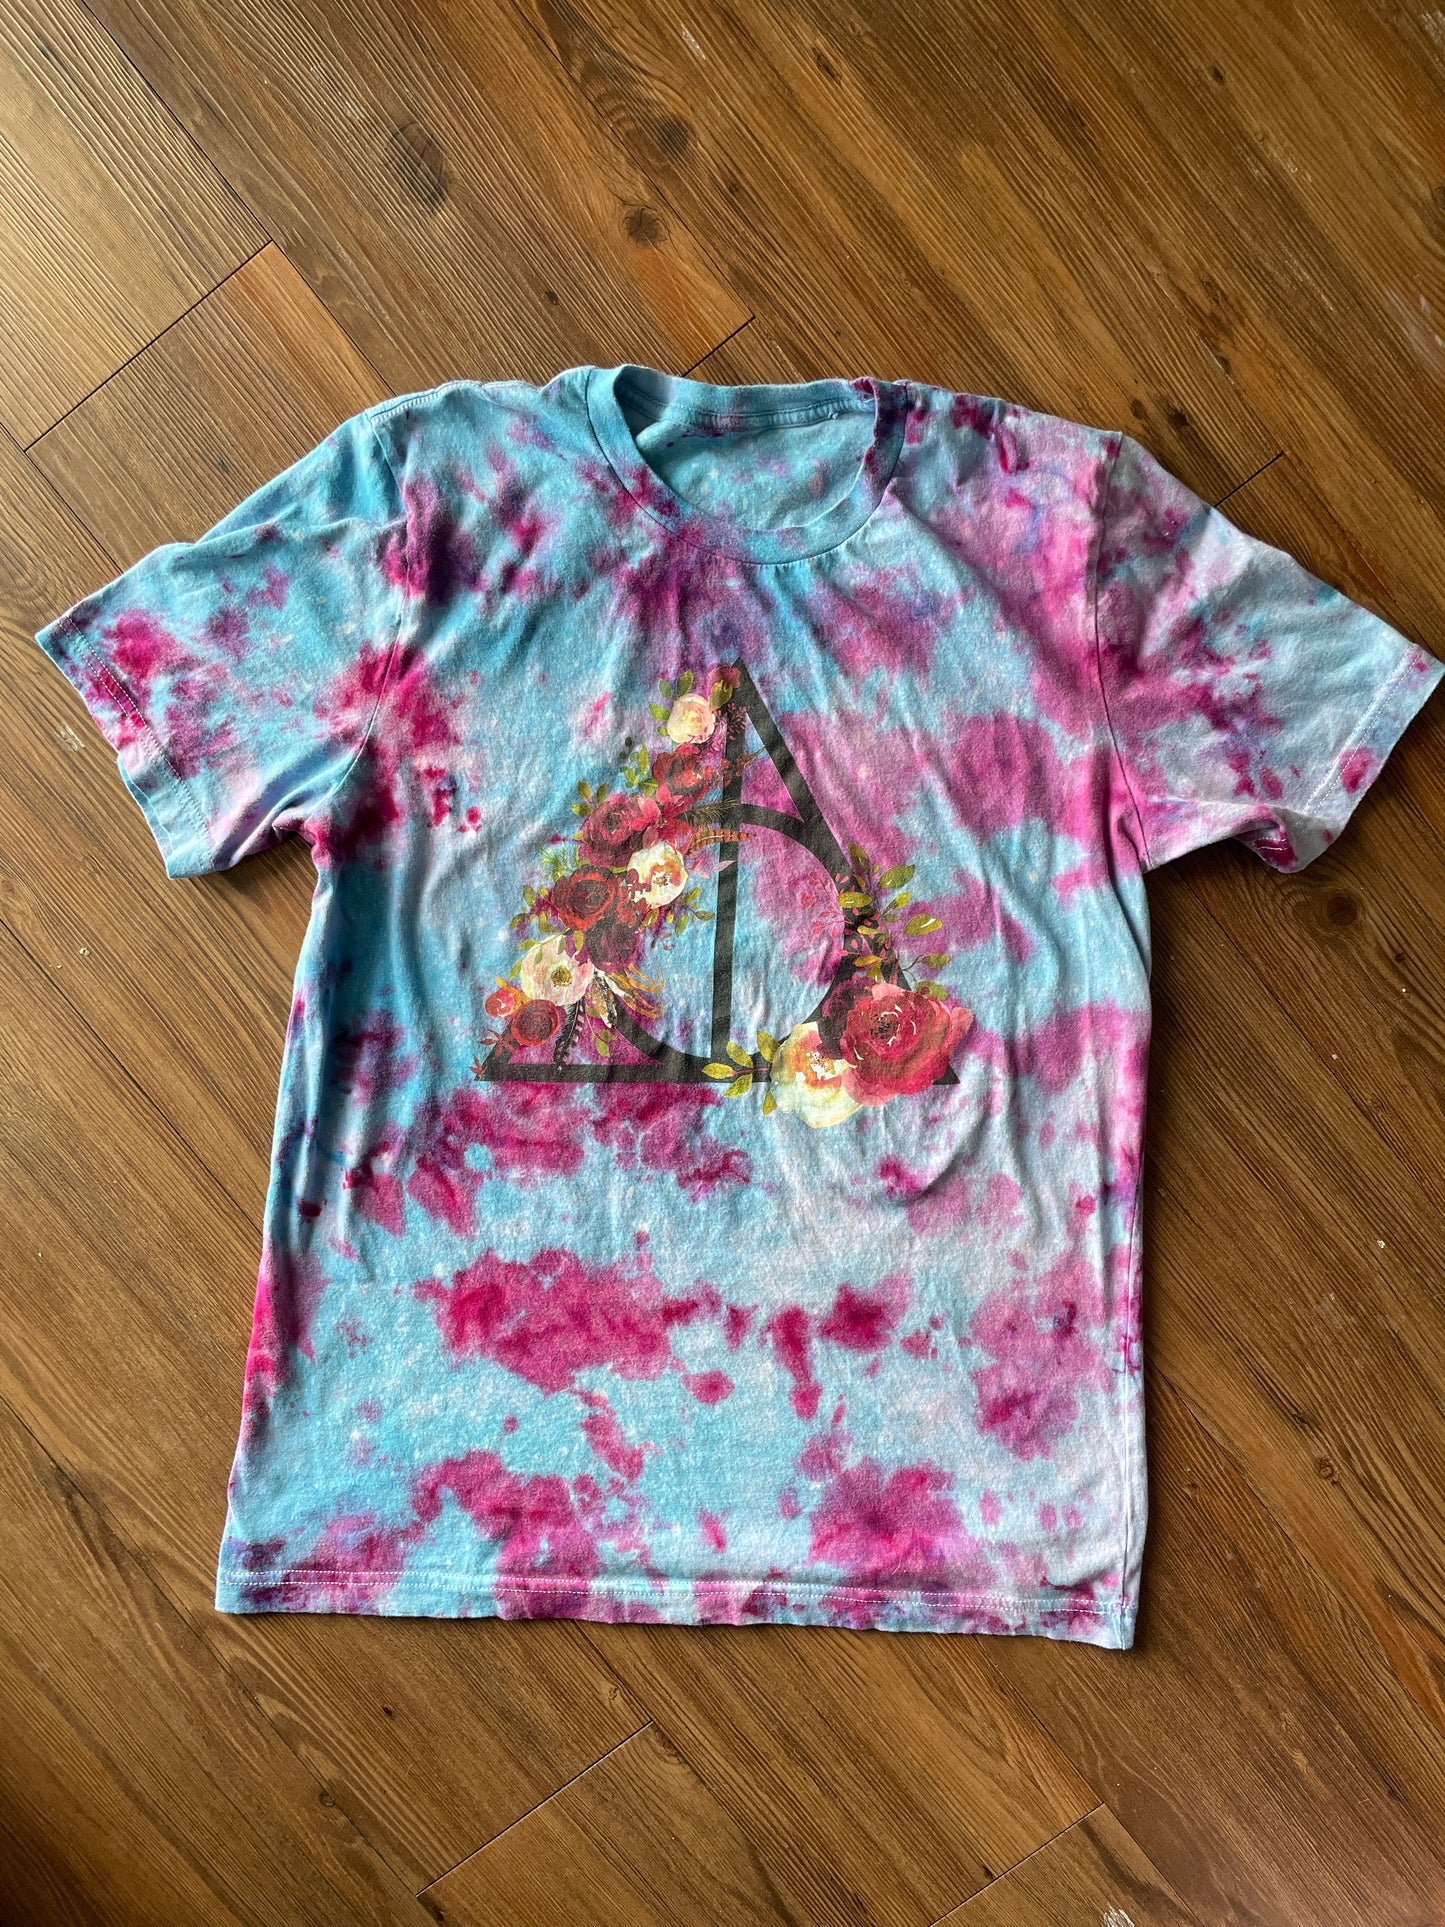 M/L Men’s Harry Potter and the Deathly Hallows Galaxy Handmade Tie Dye T-Shirt | One-Of-a-Kind Blue and Pink Snow Dyed Short Sleeve